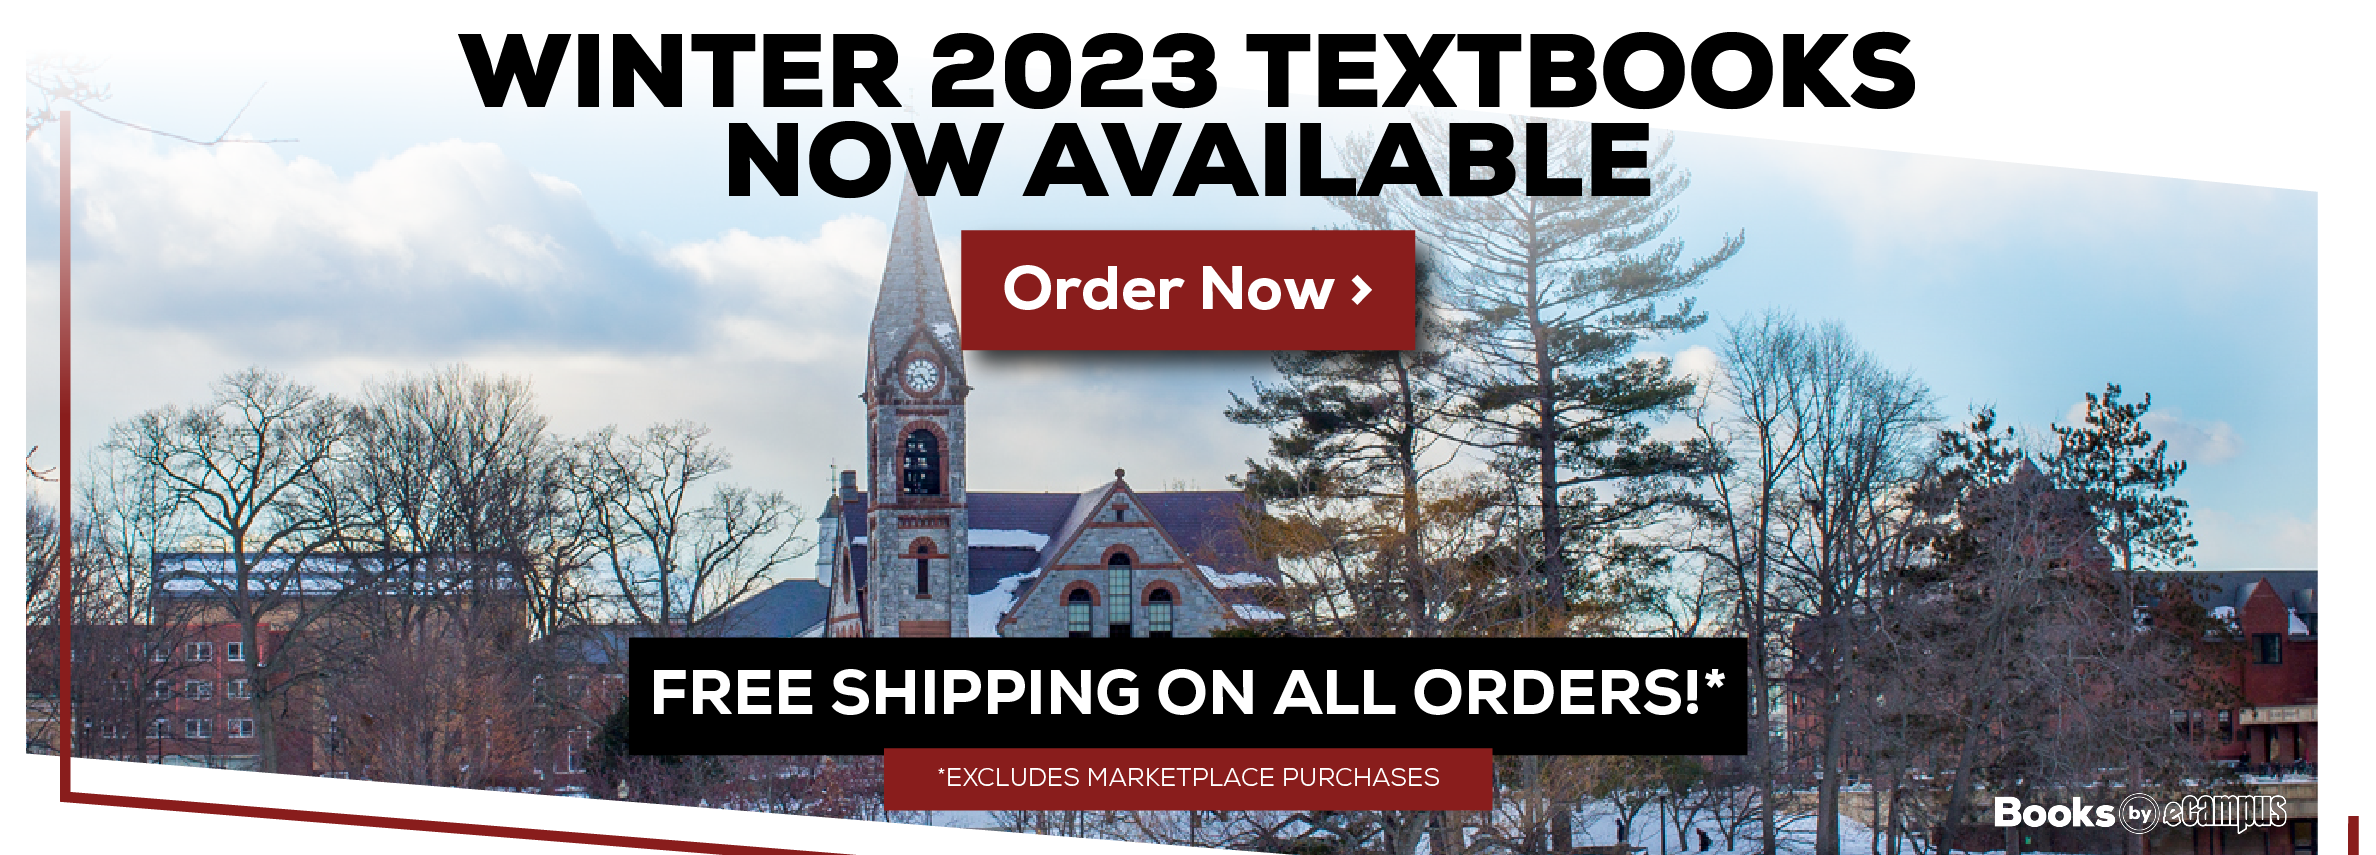 Winter 2023 Textbooks Now Available. Order Now. Free shipping on all orders.